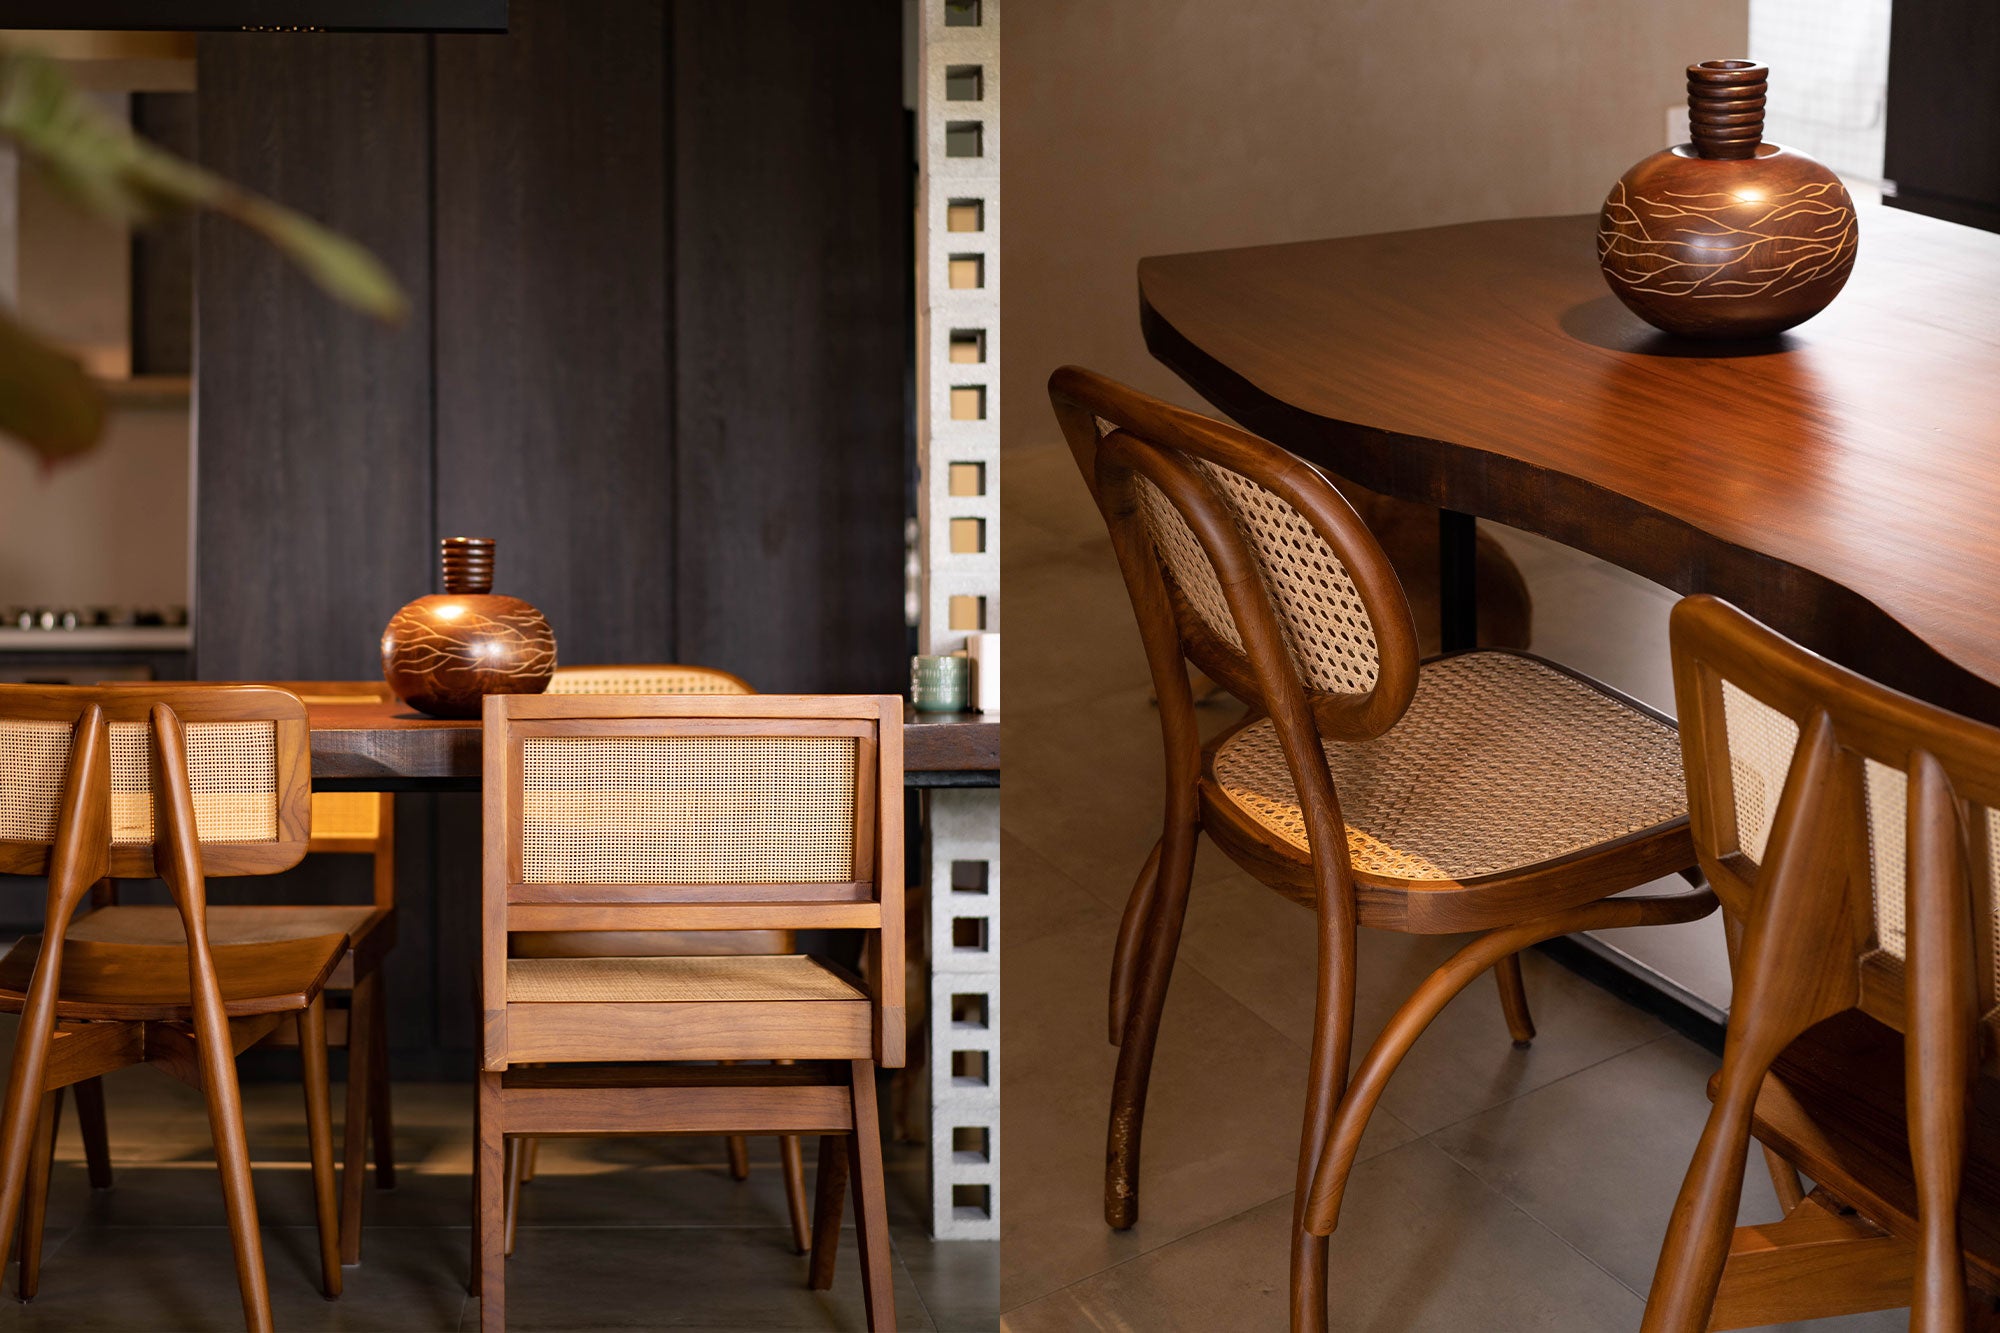 Rattan Second charm furniture at modern dining area